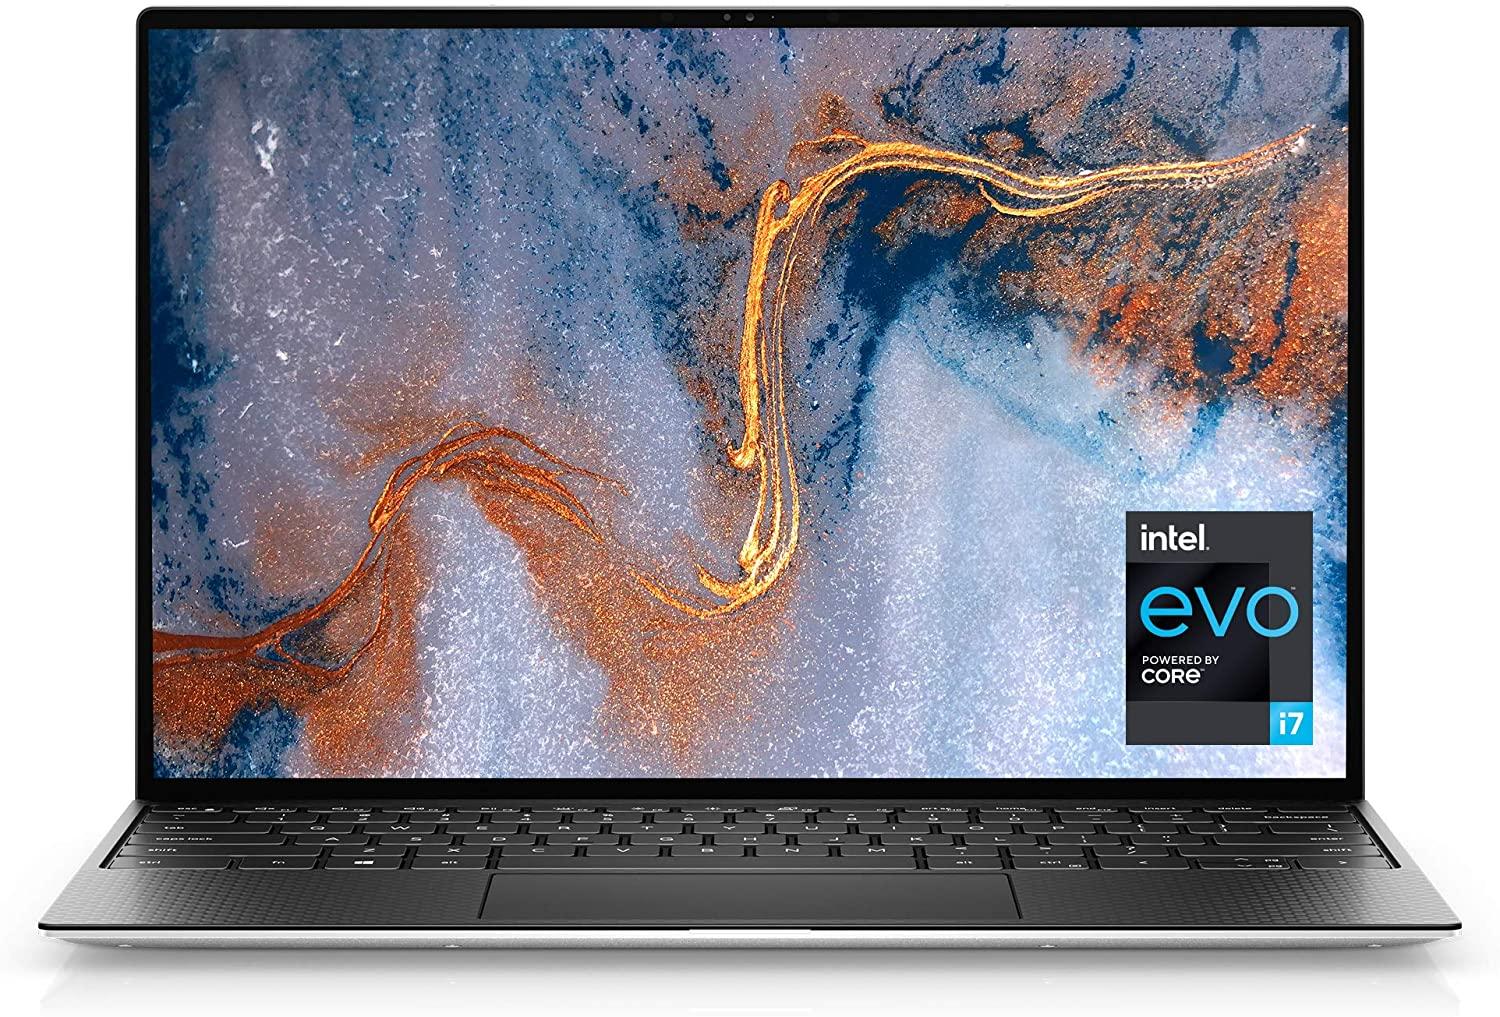 Dell XPS 13 2-in-1 i7 16GB Notebook Laptop for $1319 Shipped